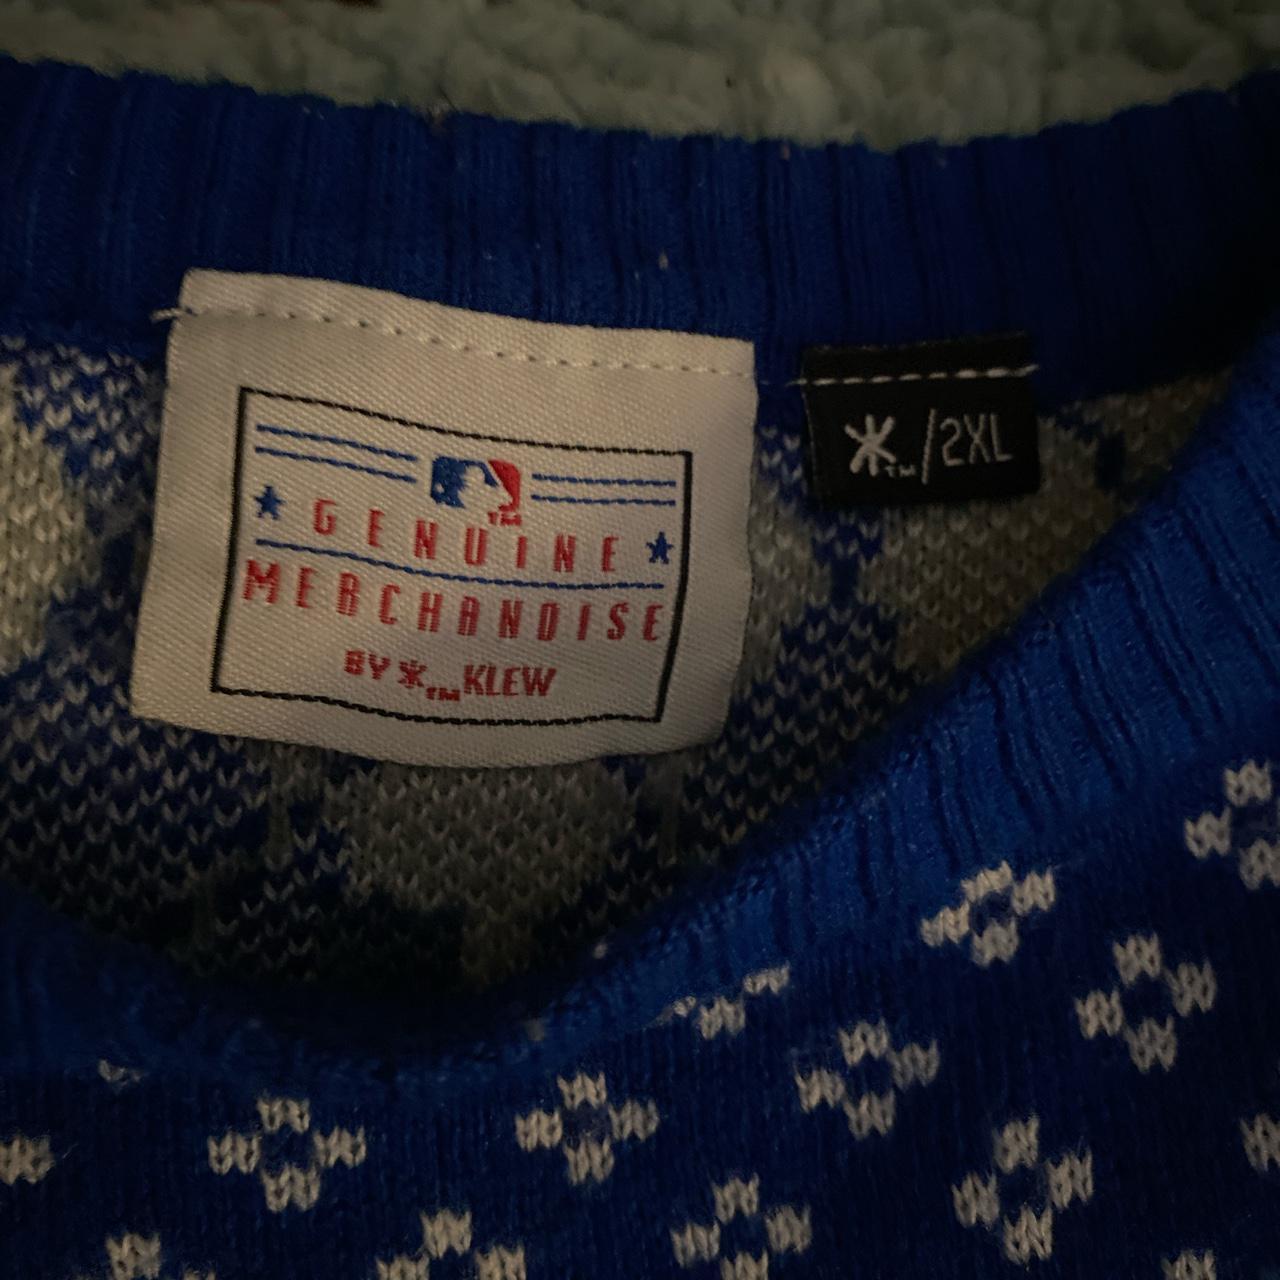 Go Dodgers Christmas Ugly Sweater Blue TWS by Vinco 3XL